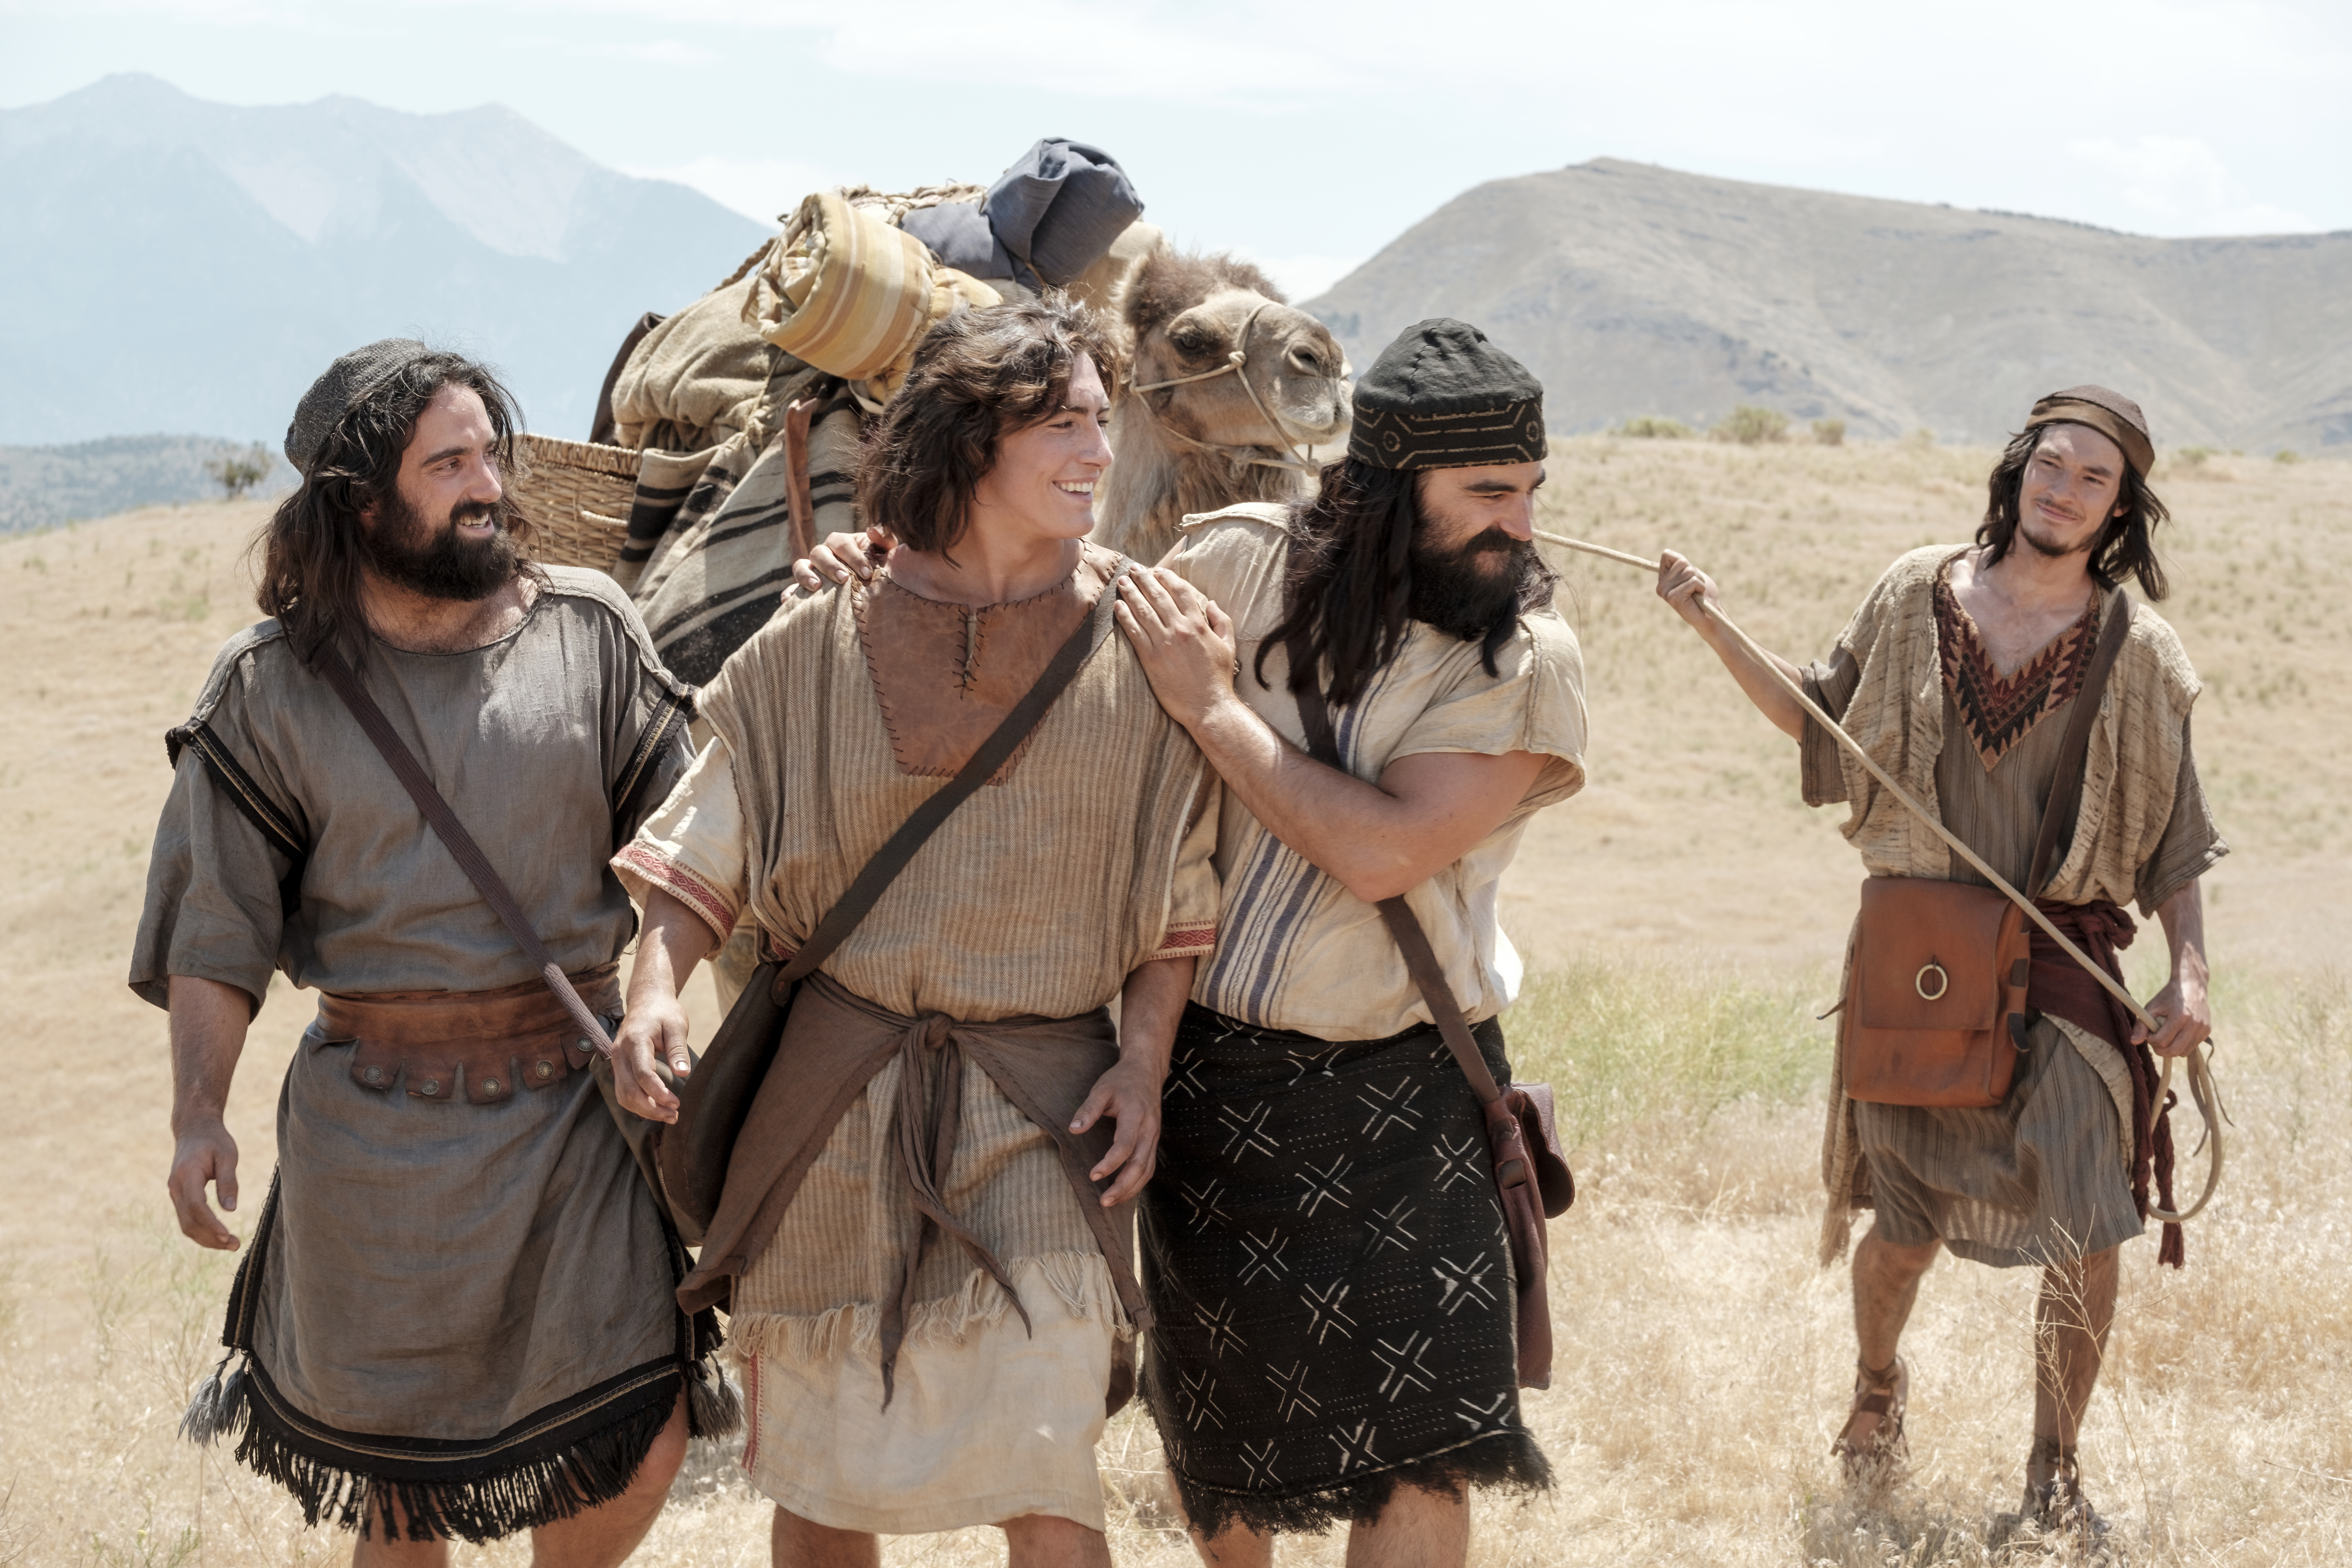 Nephi and his brothers travel to Ishmael's house to ask Ishmael's family to join them.